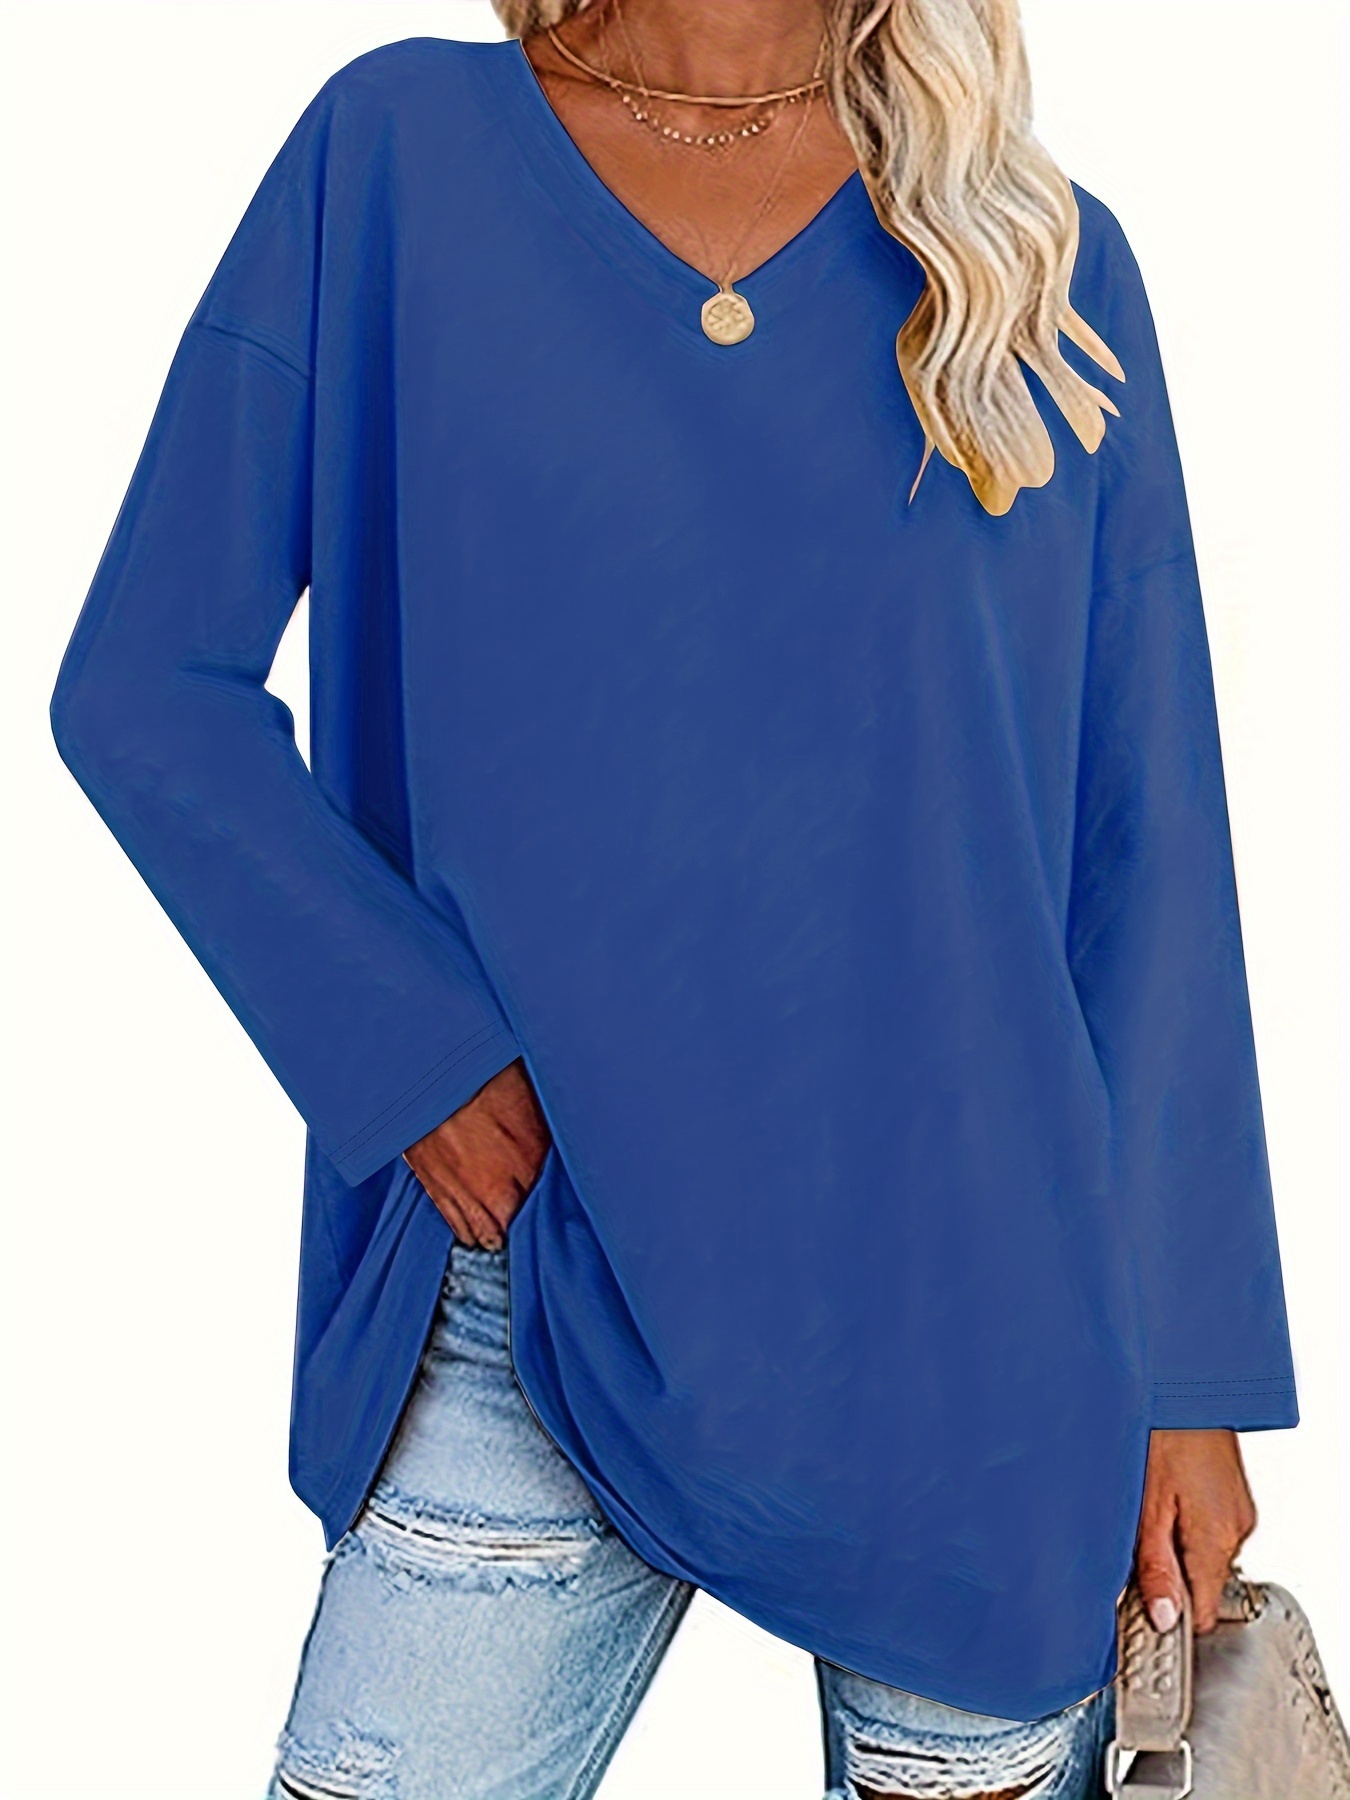  Womens Plus Size T Shirt V Neck Loose Fit Long Sleeve